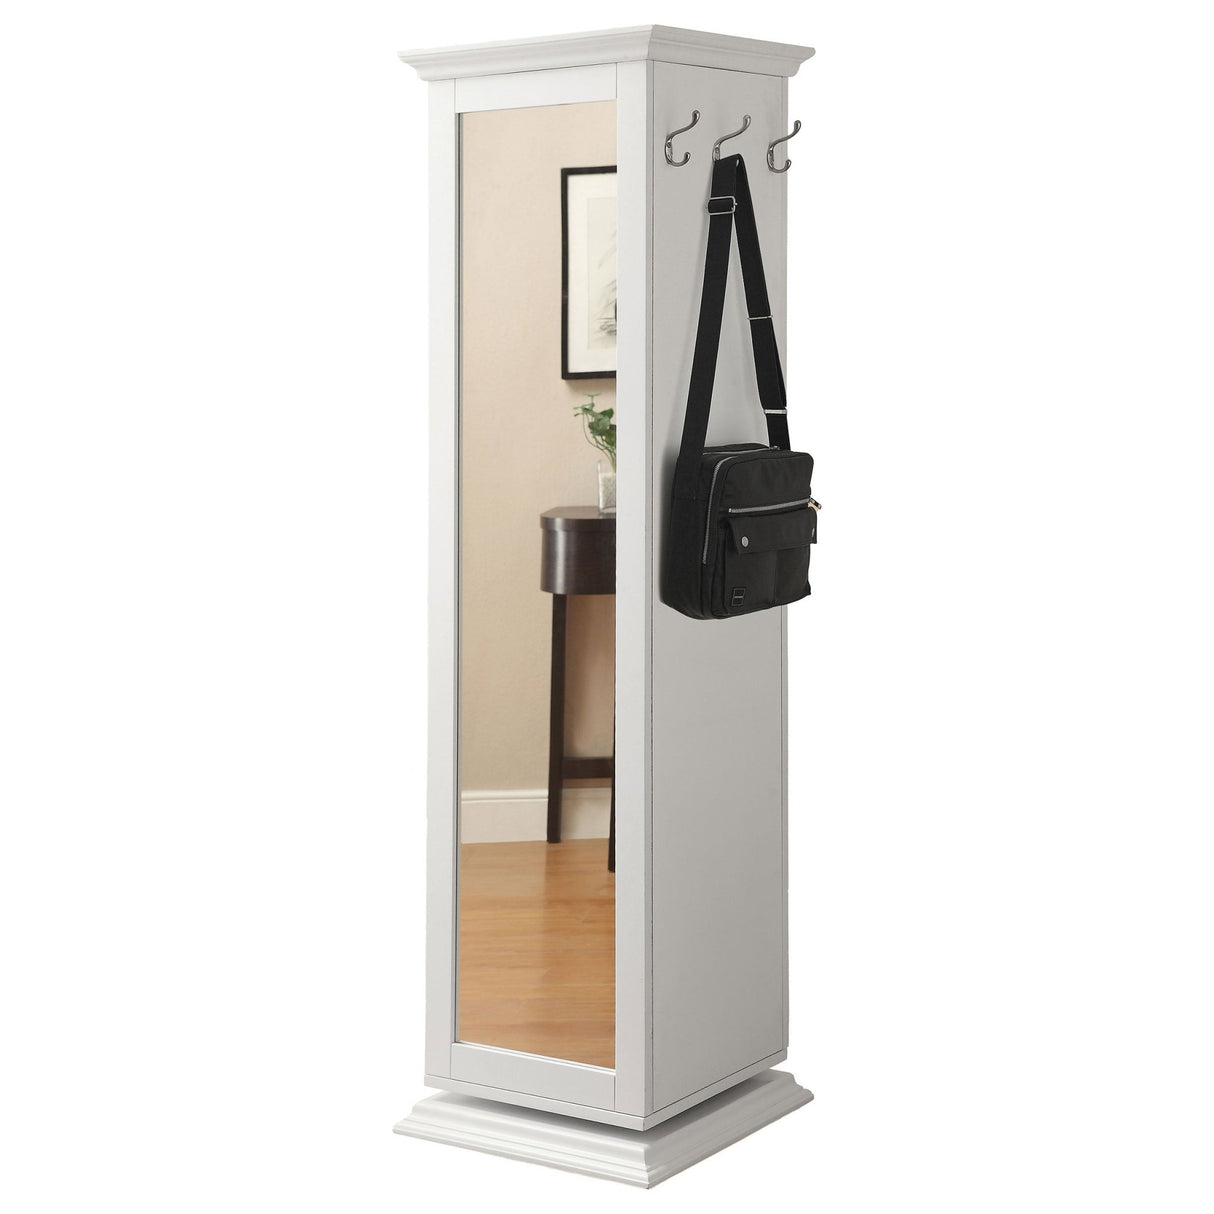 Accent Cabinet - Robinsons Swivel Accent Cabinet with Cork Board White